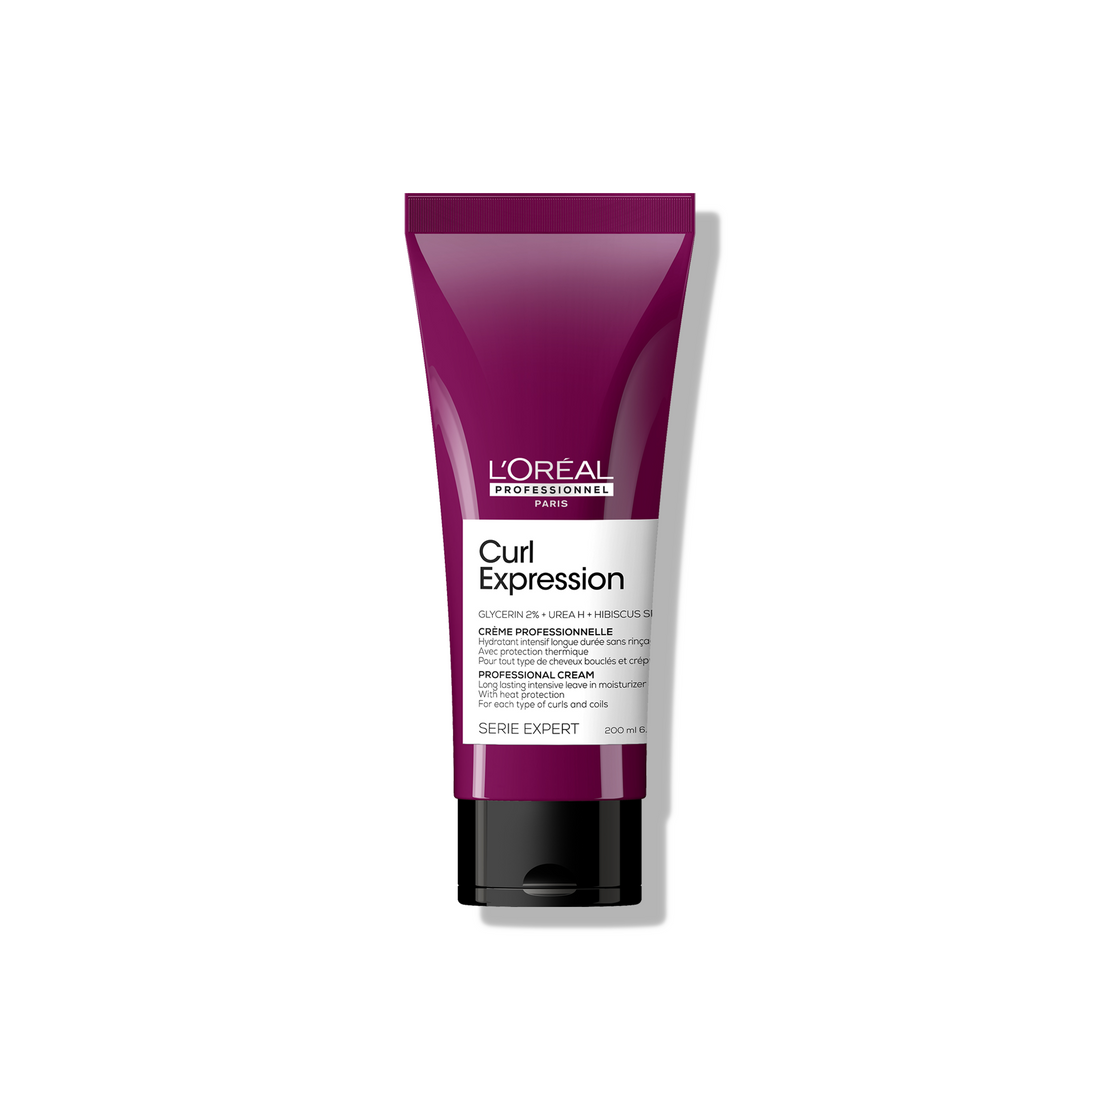 Serie Expert Curl Expression Long Lasting Intensive Moisturizer